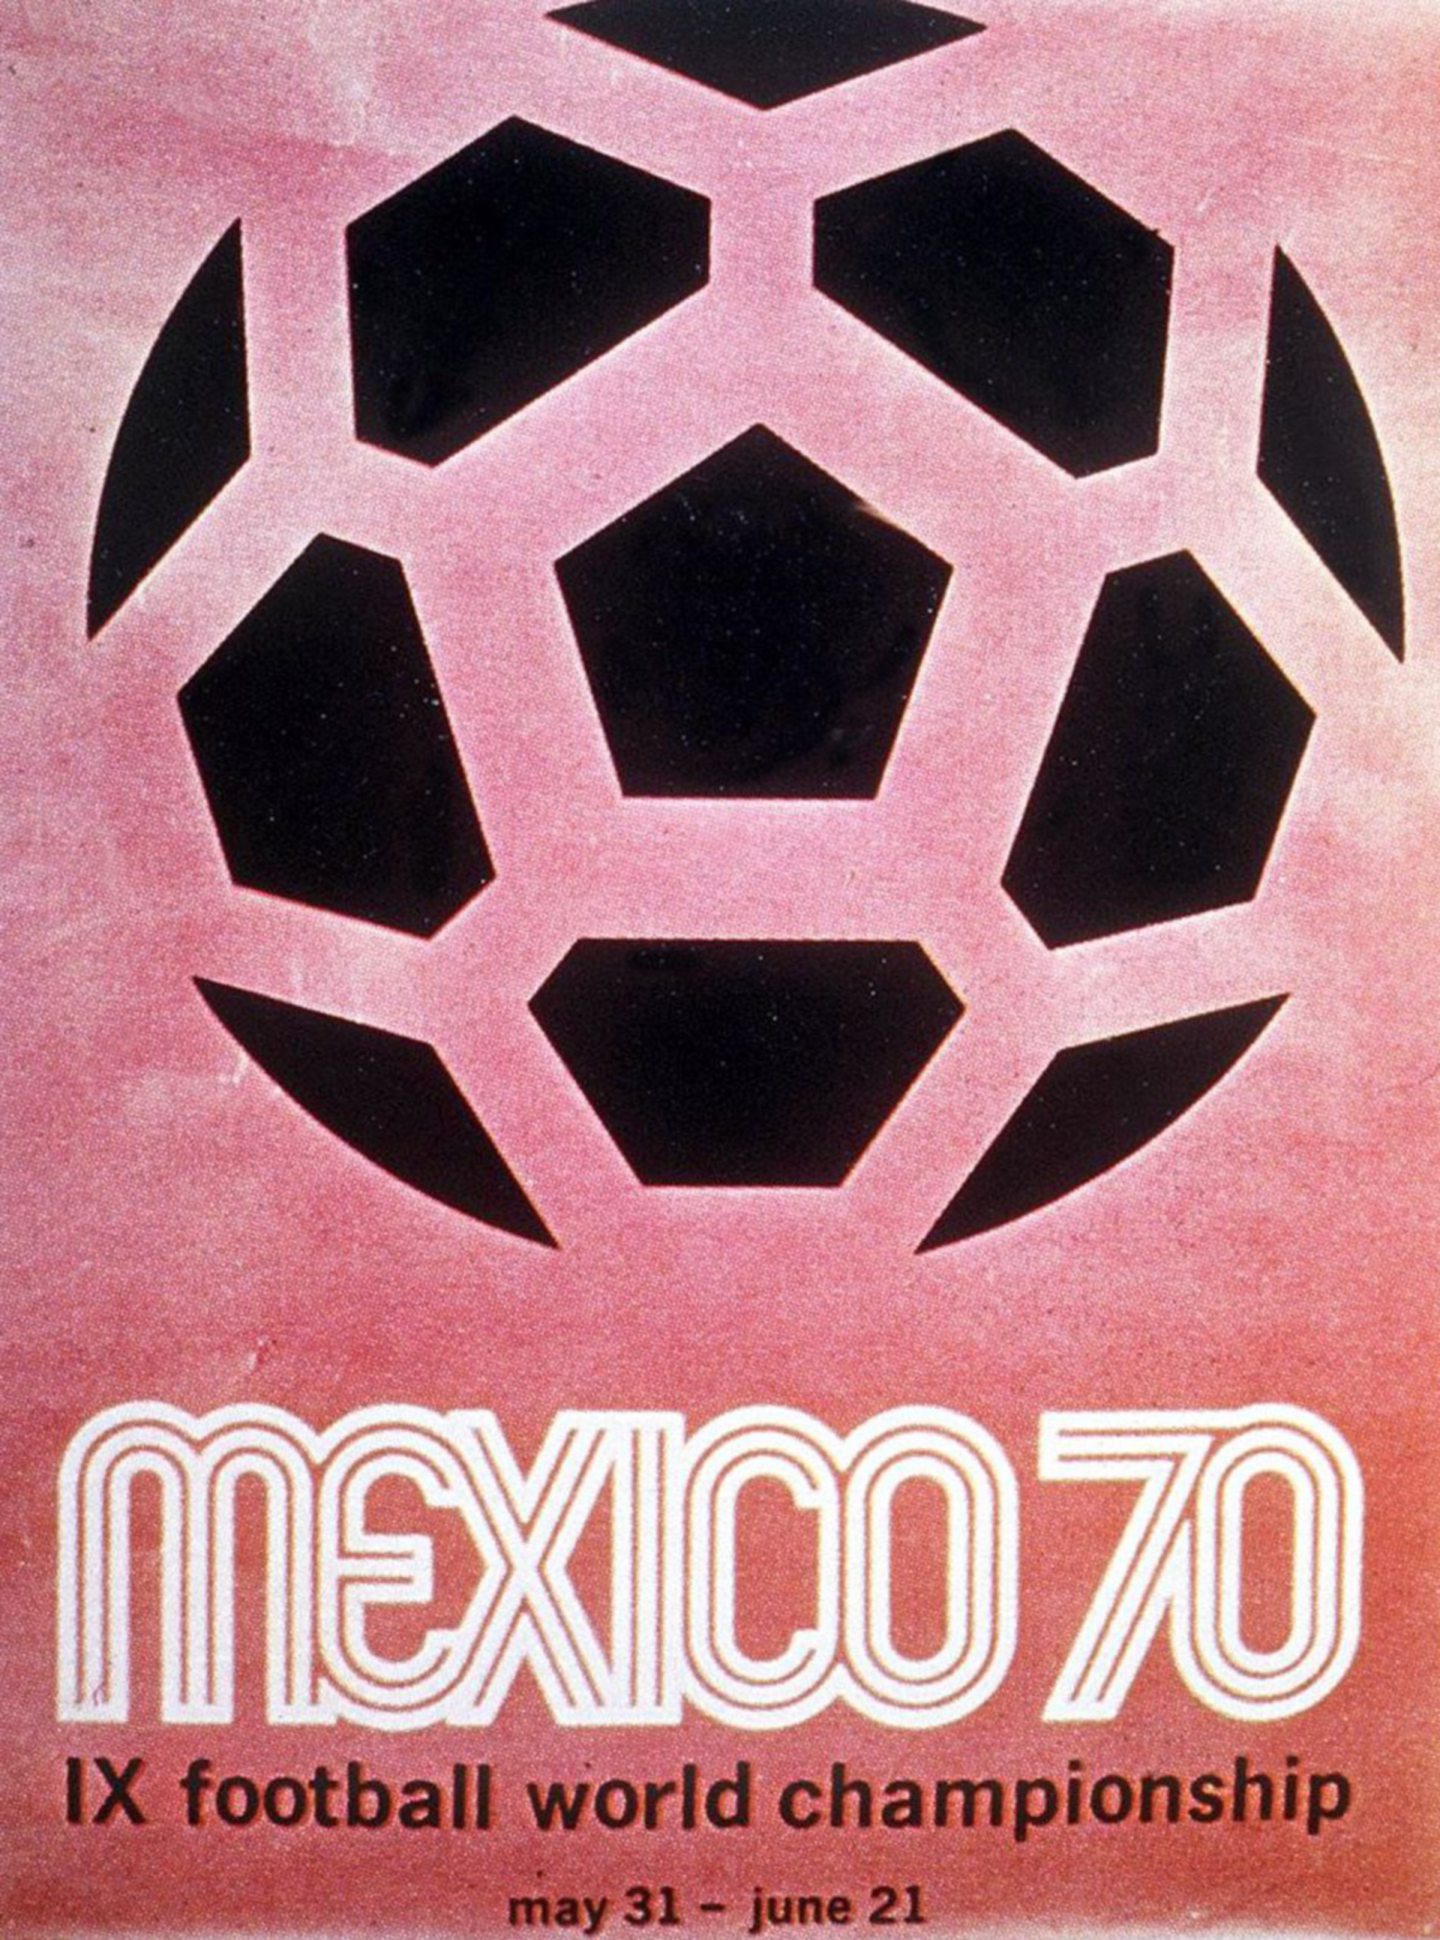 The offical poster for the 1970 World Cup.